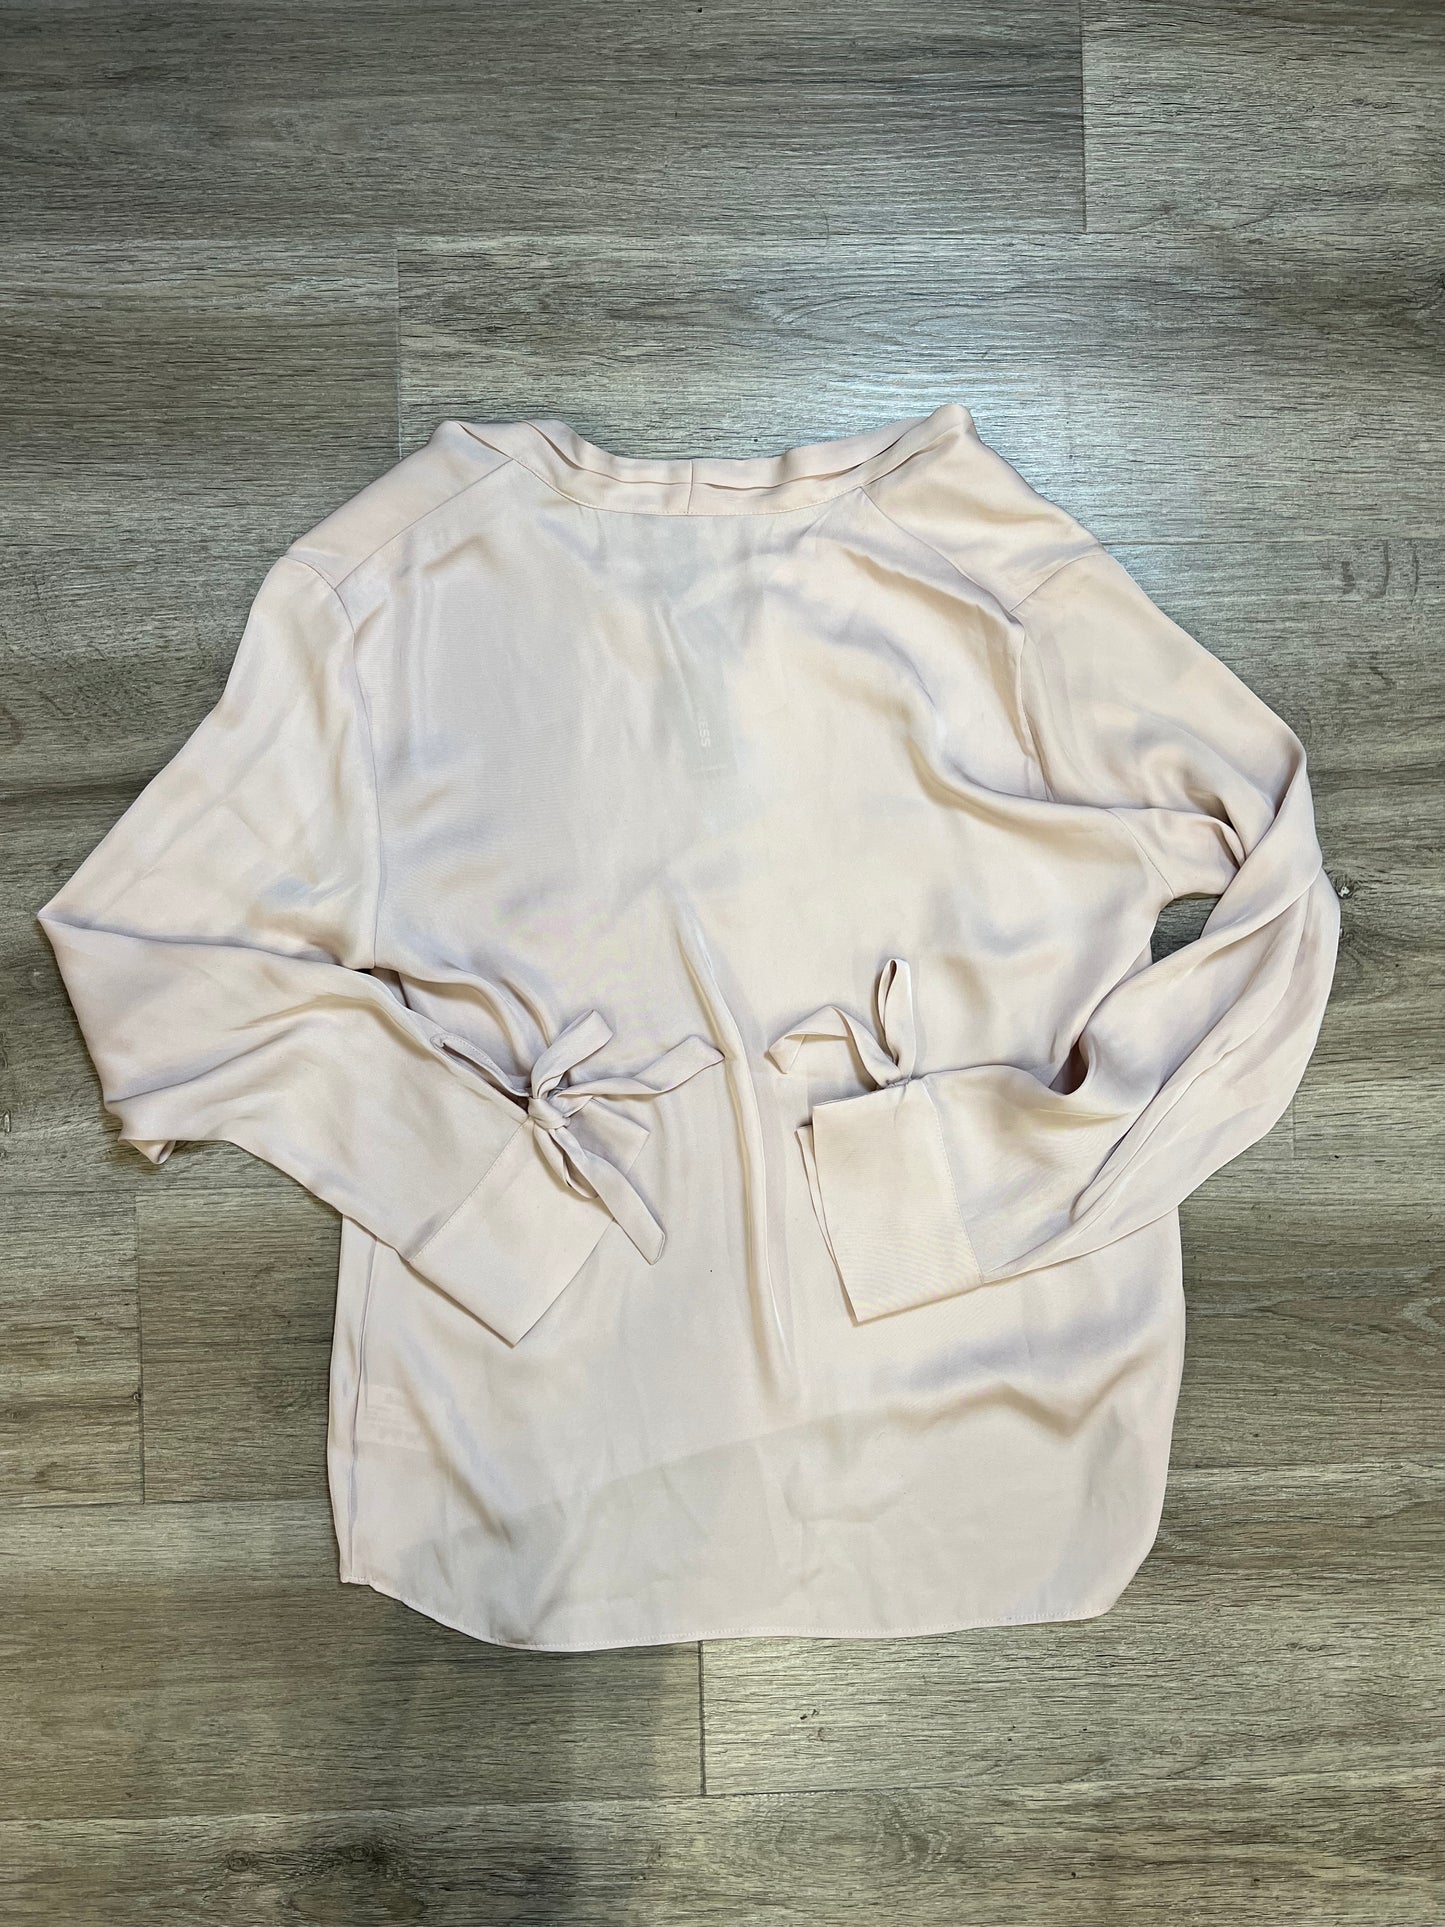 Blouse Long Sleeve By Express  Size: L